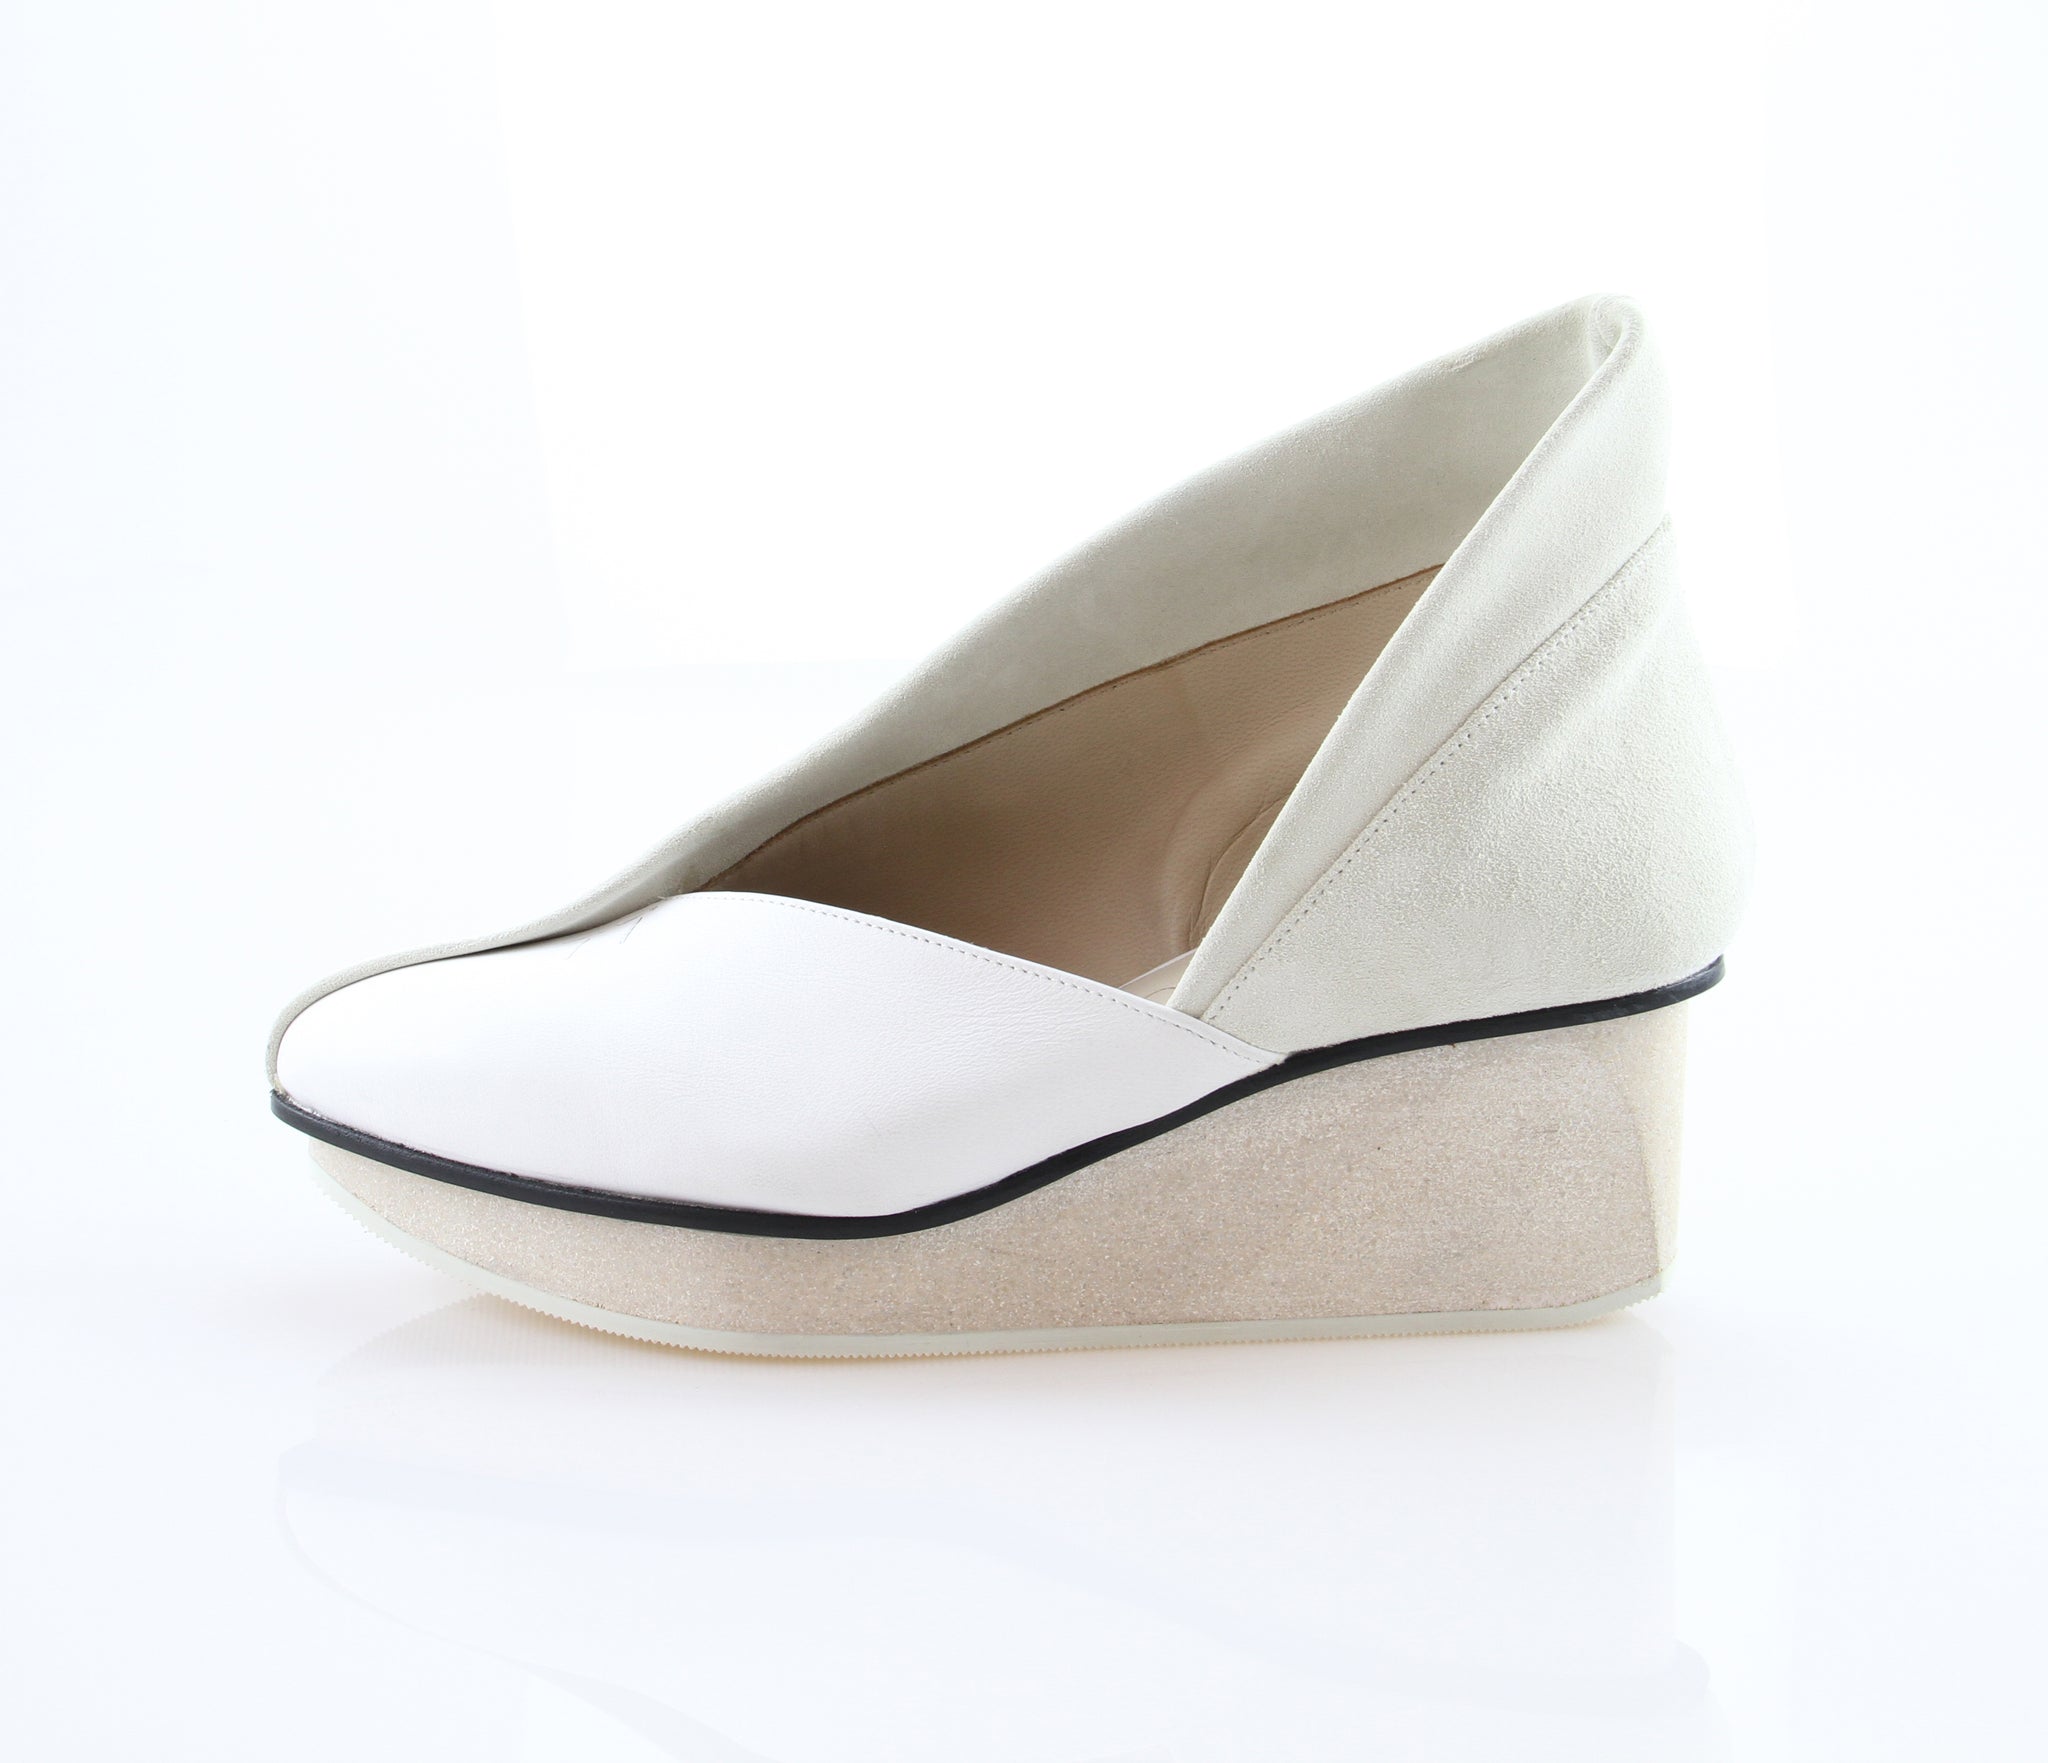 TRIPTYCH WOMEN'S WHITE LEATHER WEDGE SHOE